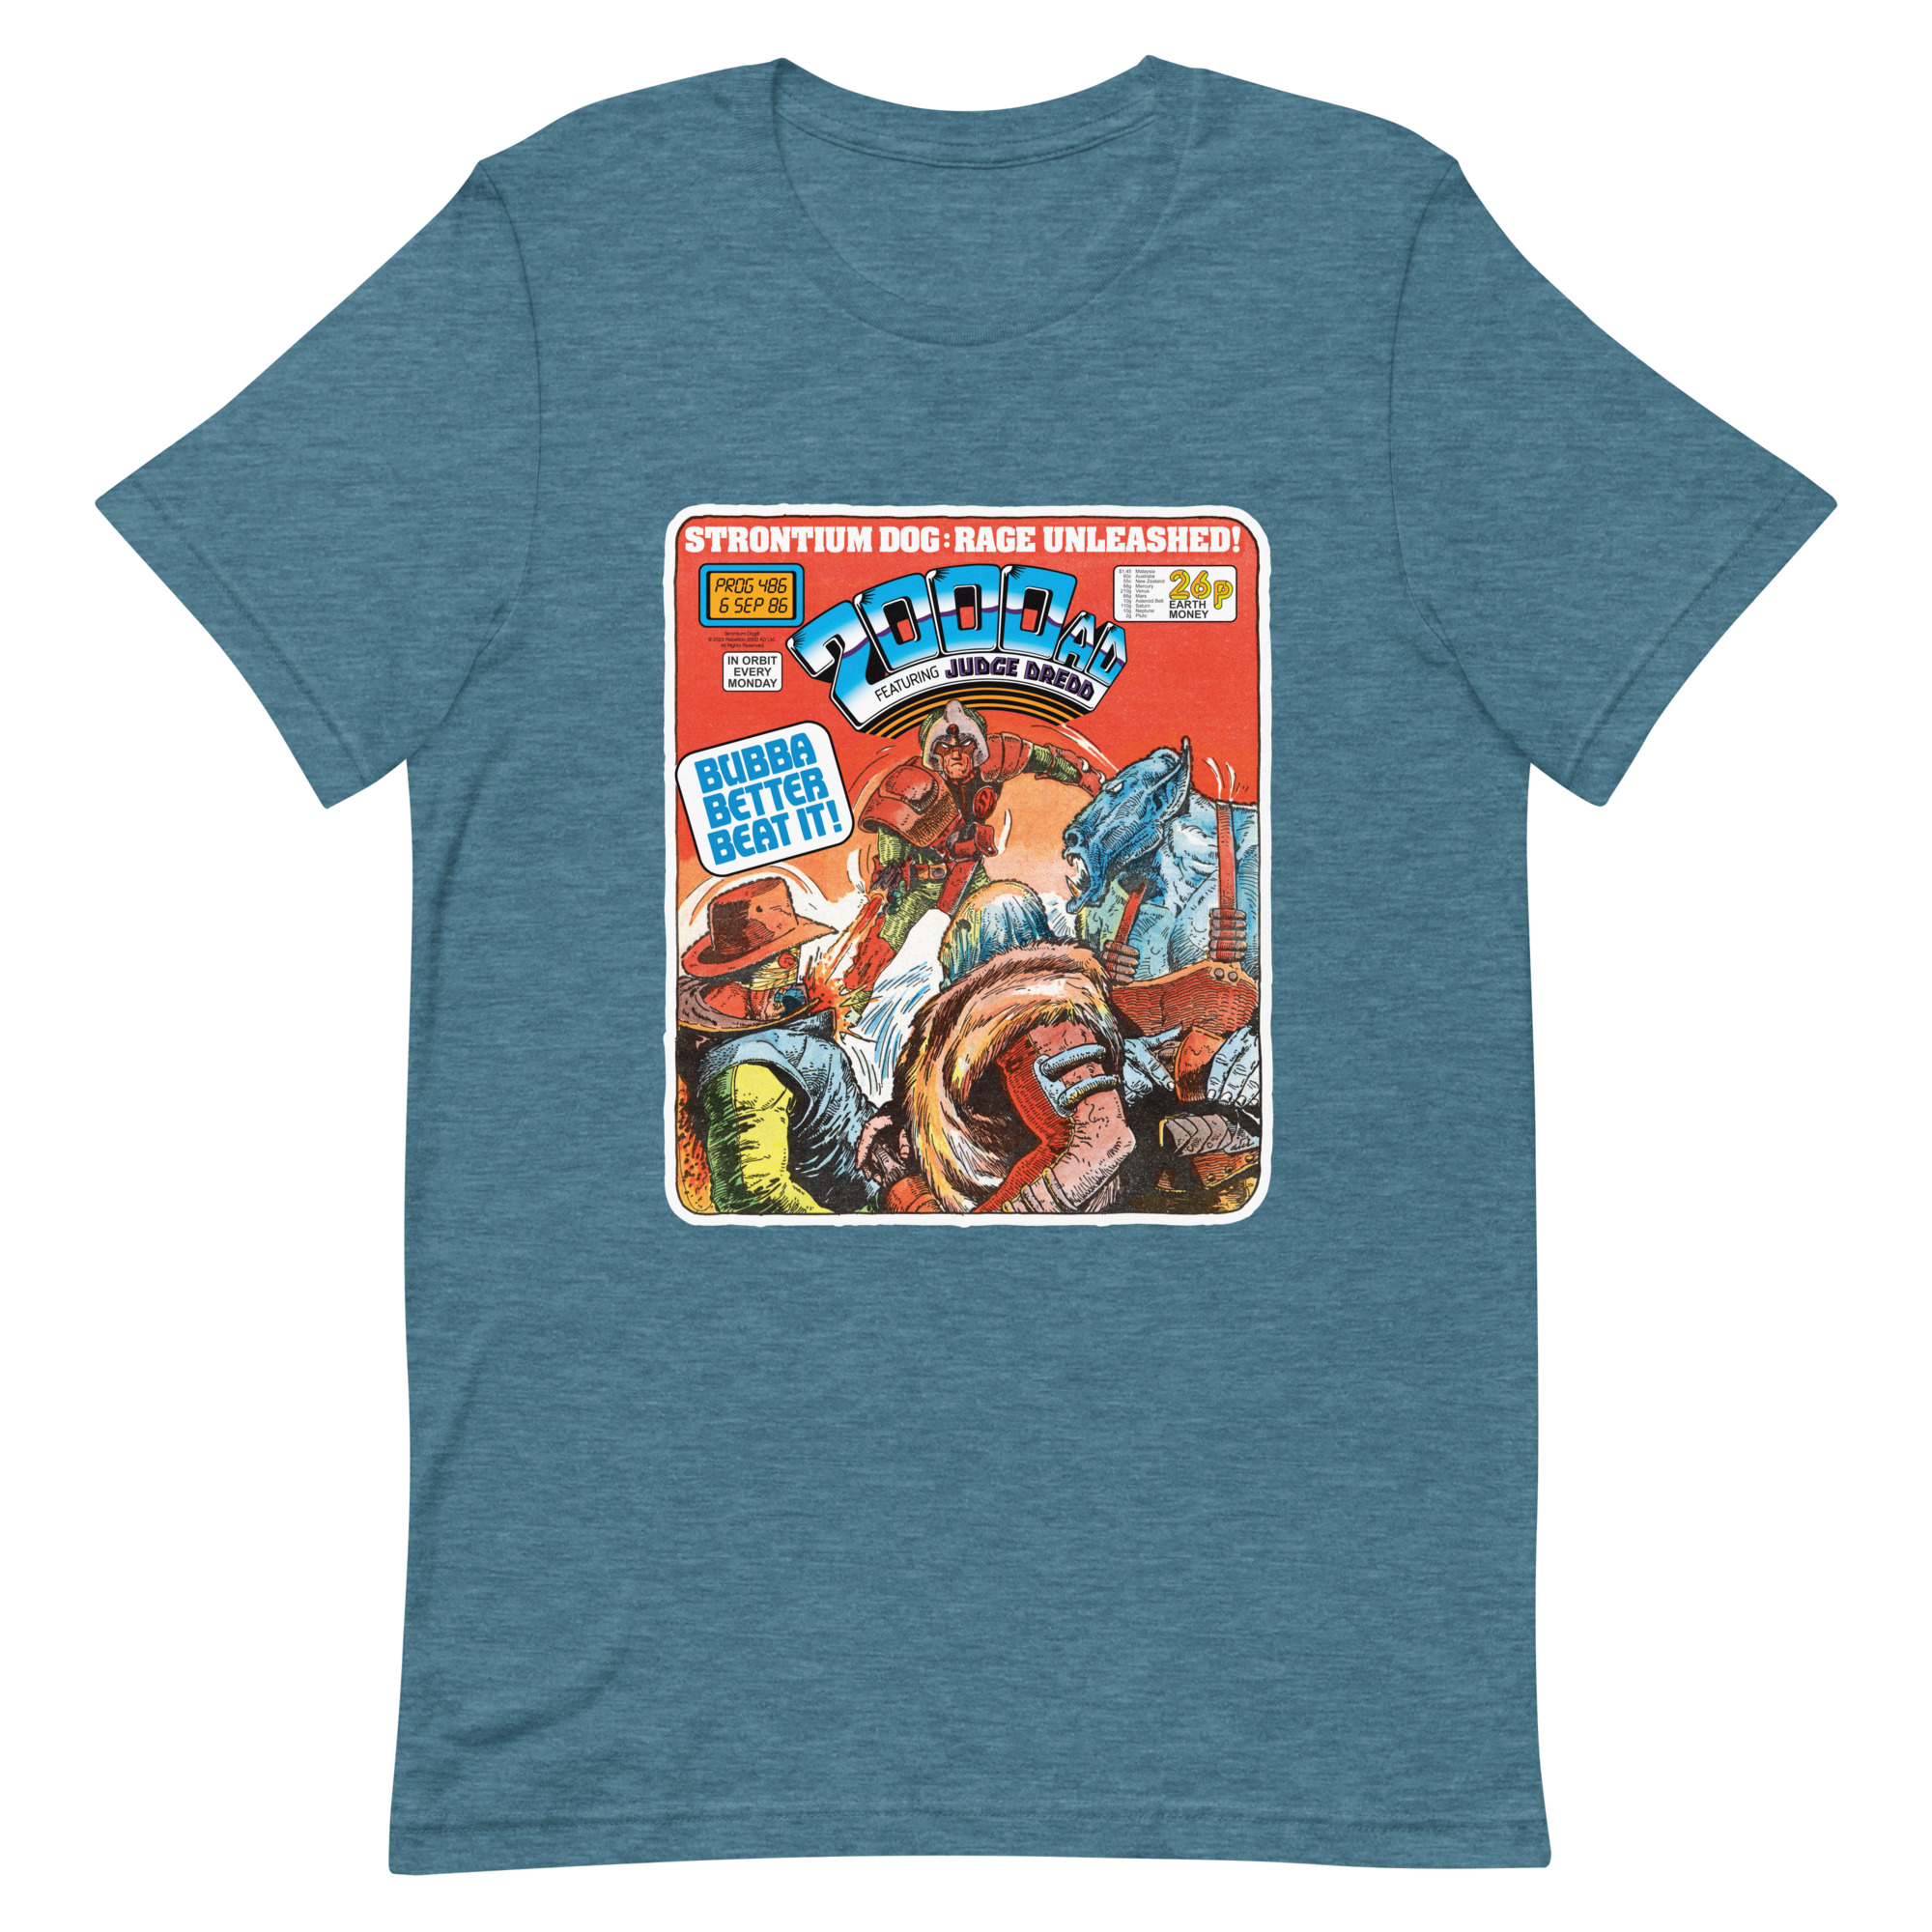 Blue Tshirt with a 'Classic' 2000 AD Cover image on the chest. In the image Strontium Dog faces off against three alien ruffians.